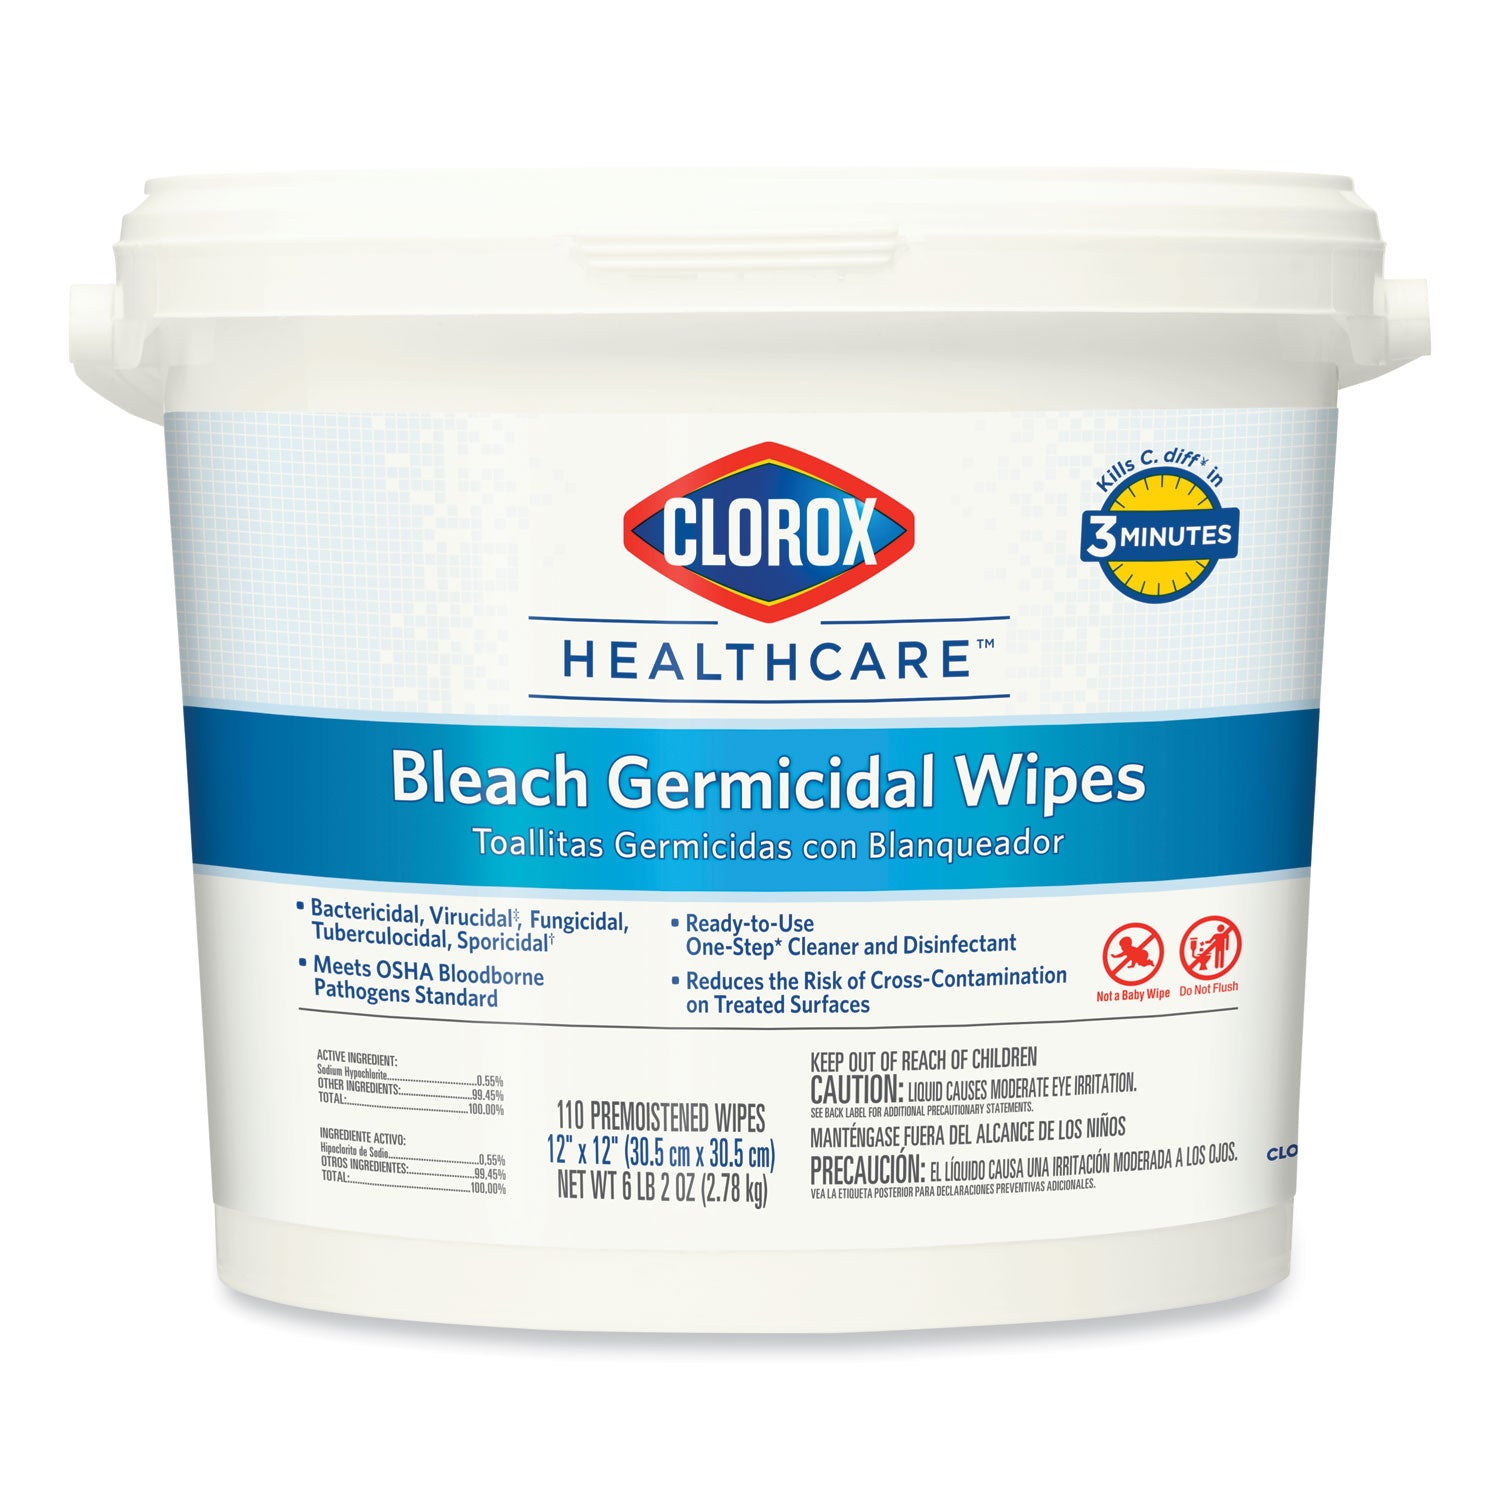 Bleach Germicidal Wipes, 1-Ply, 12 x 12, Unscented, White, 110/Bucket - 